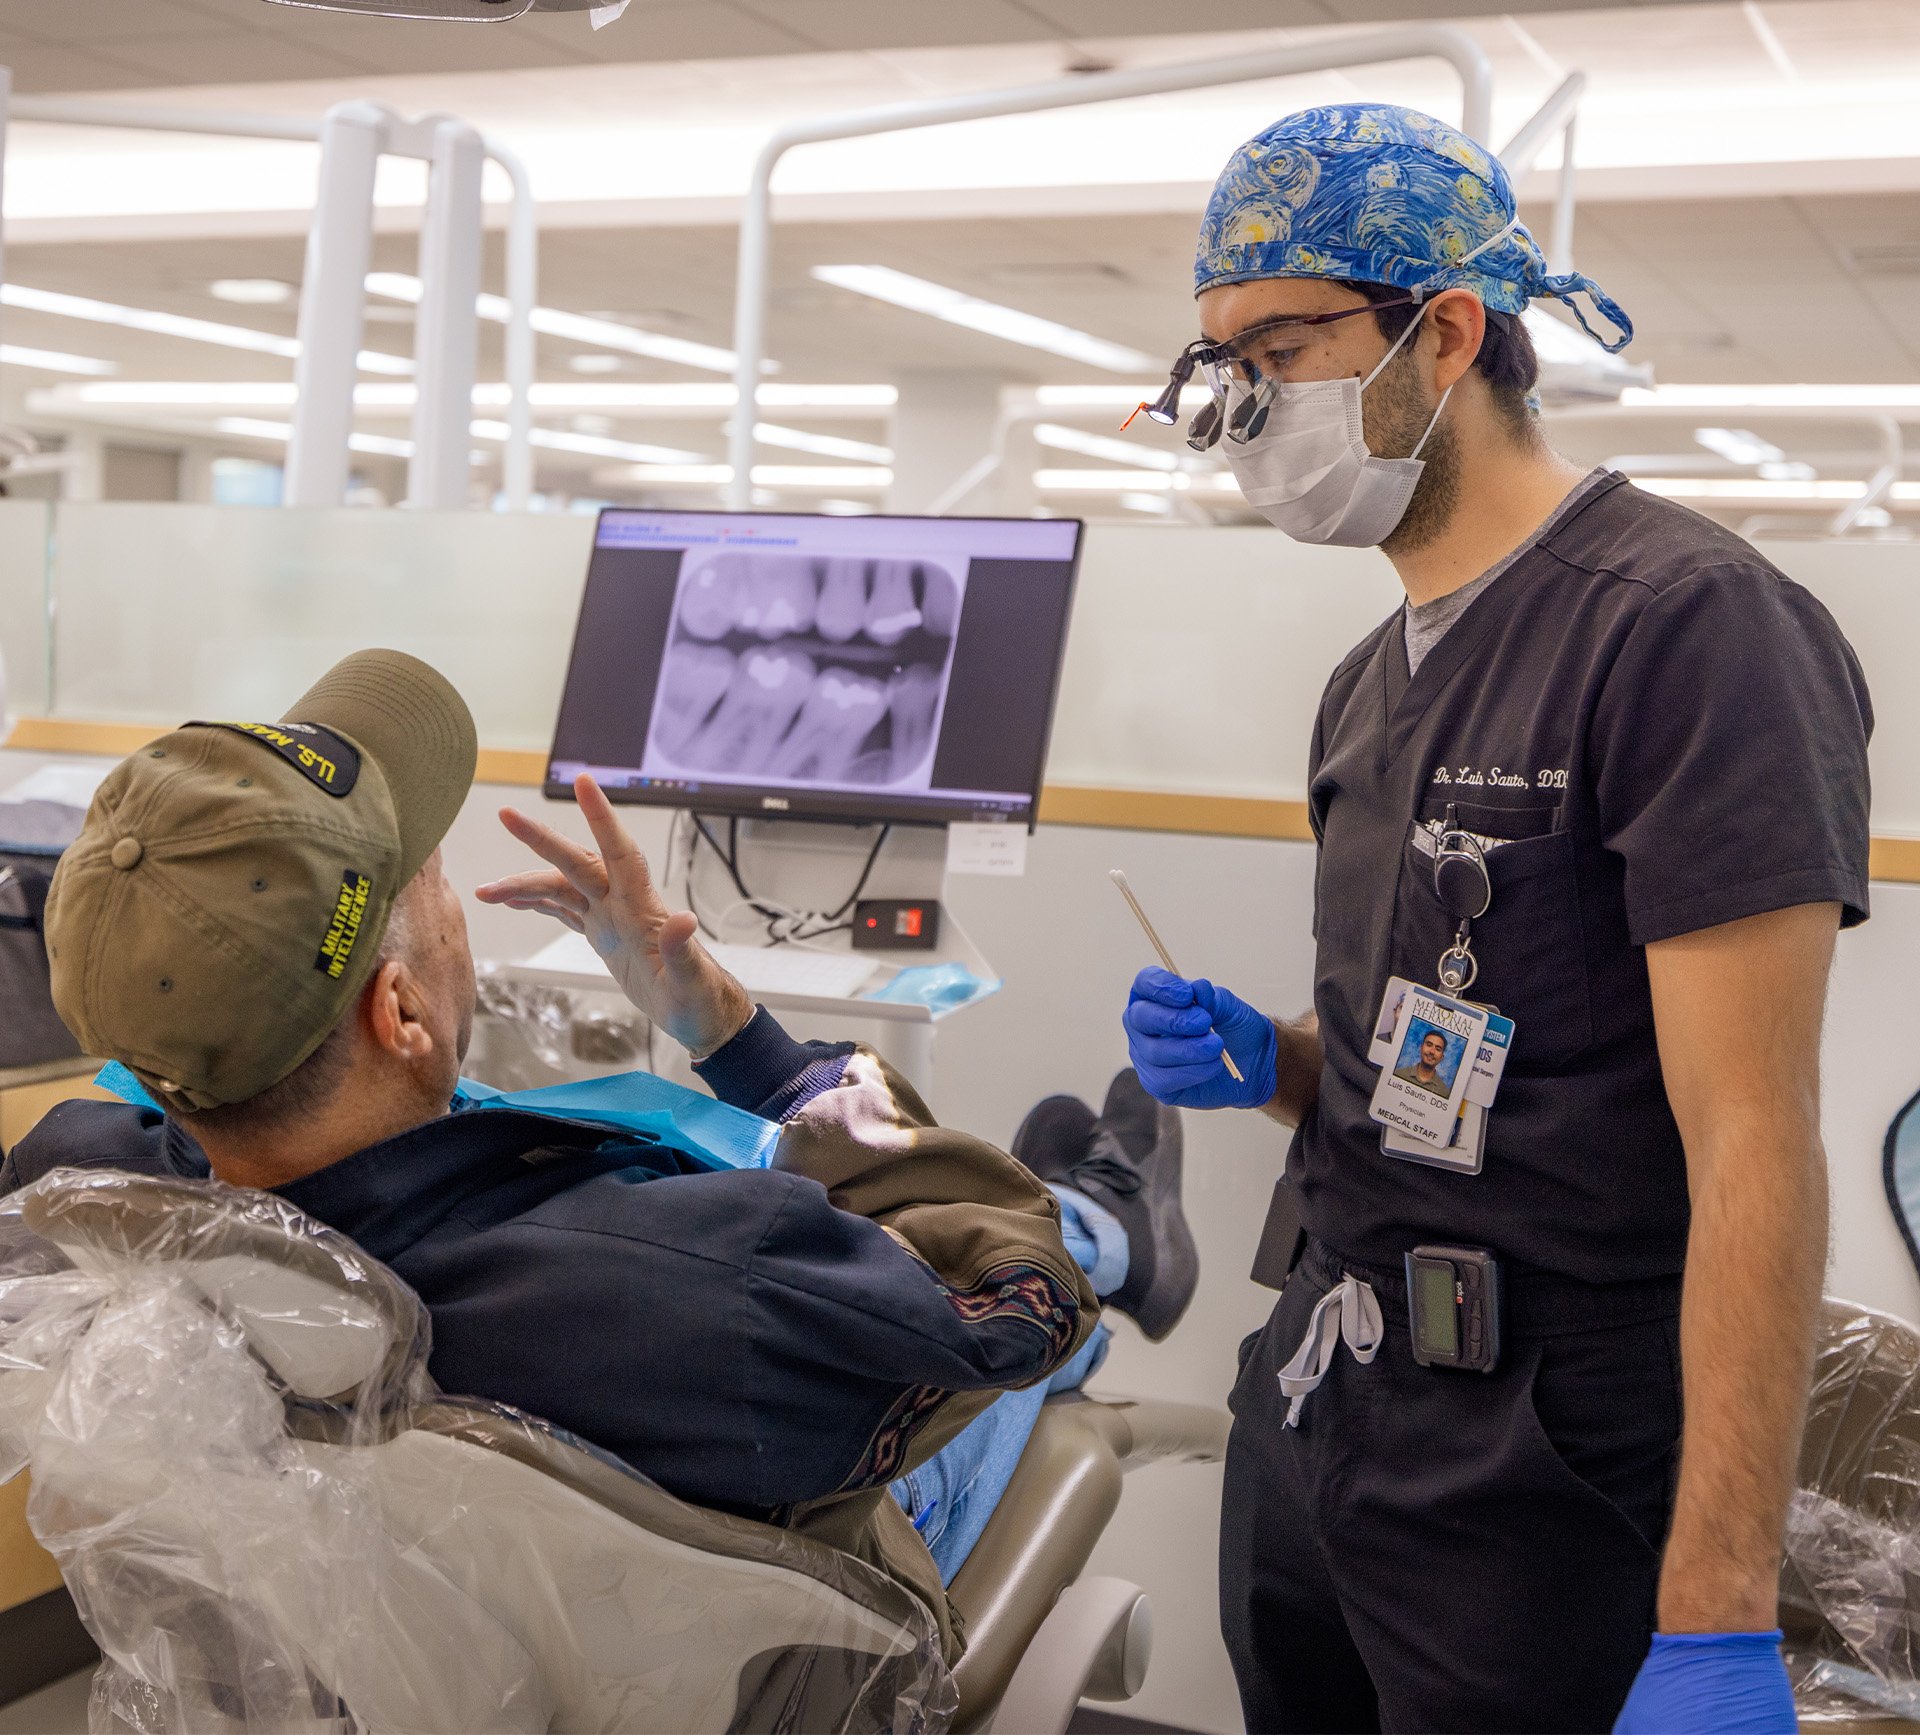 Sixty-six U.S. military veterans received a total of 431 treatments valued at $70,172 during the 9th Annual Give Vets a Smile held Nov. 3 at UTHealth Houston School of Dentistry.